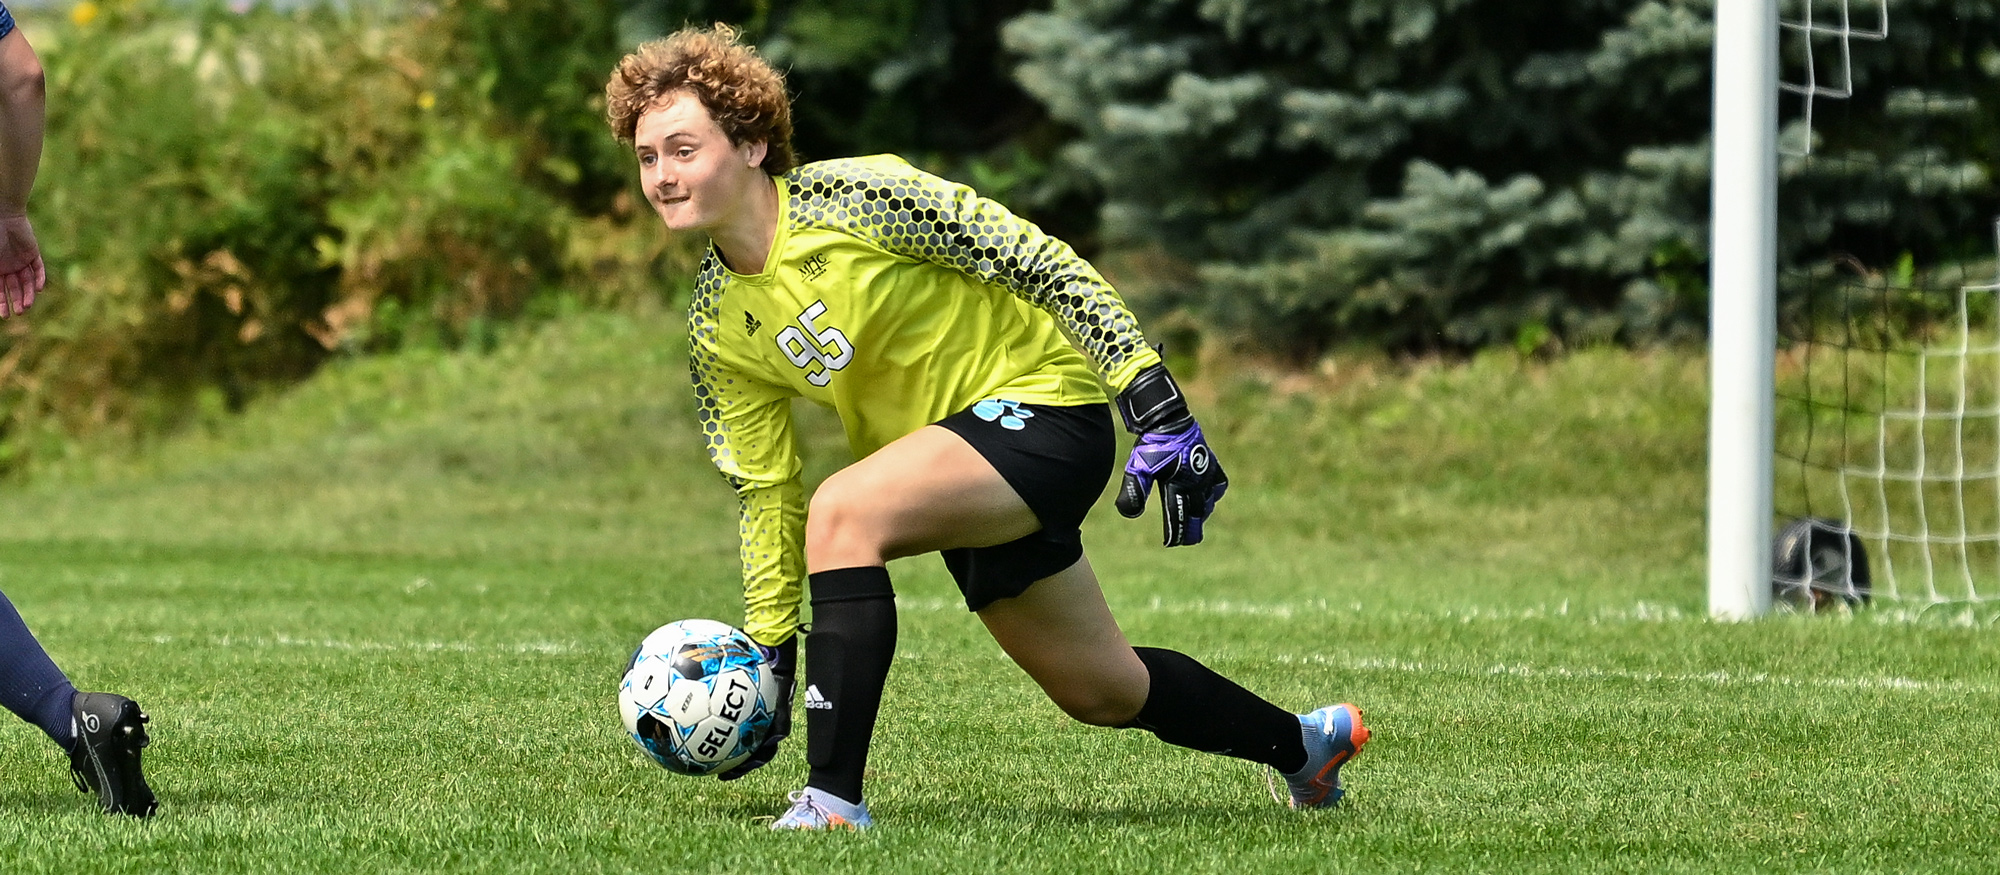 Evie Krieg had eight saves and allowed one goal on a penalty shot in Mount Holyoke's 1-0 loss to Keene State on Oct. 23, 2023. (RJB Sports file photo)